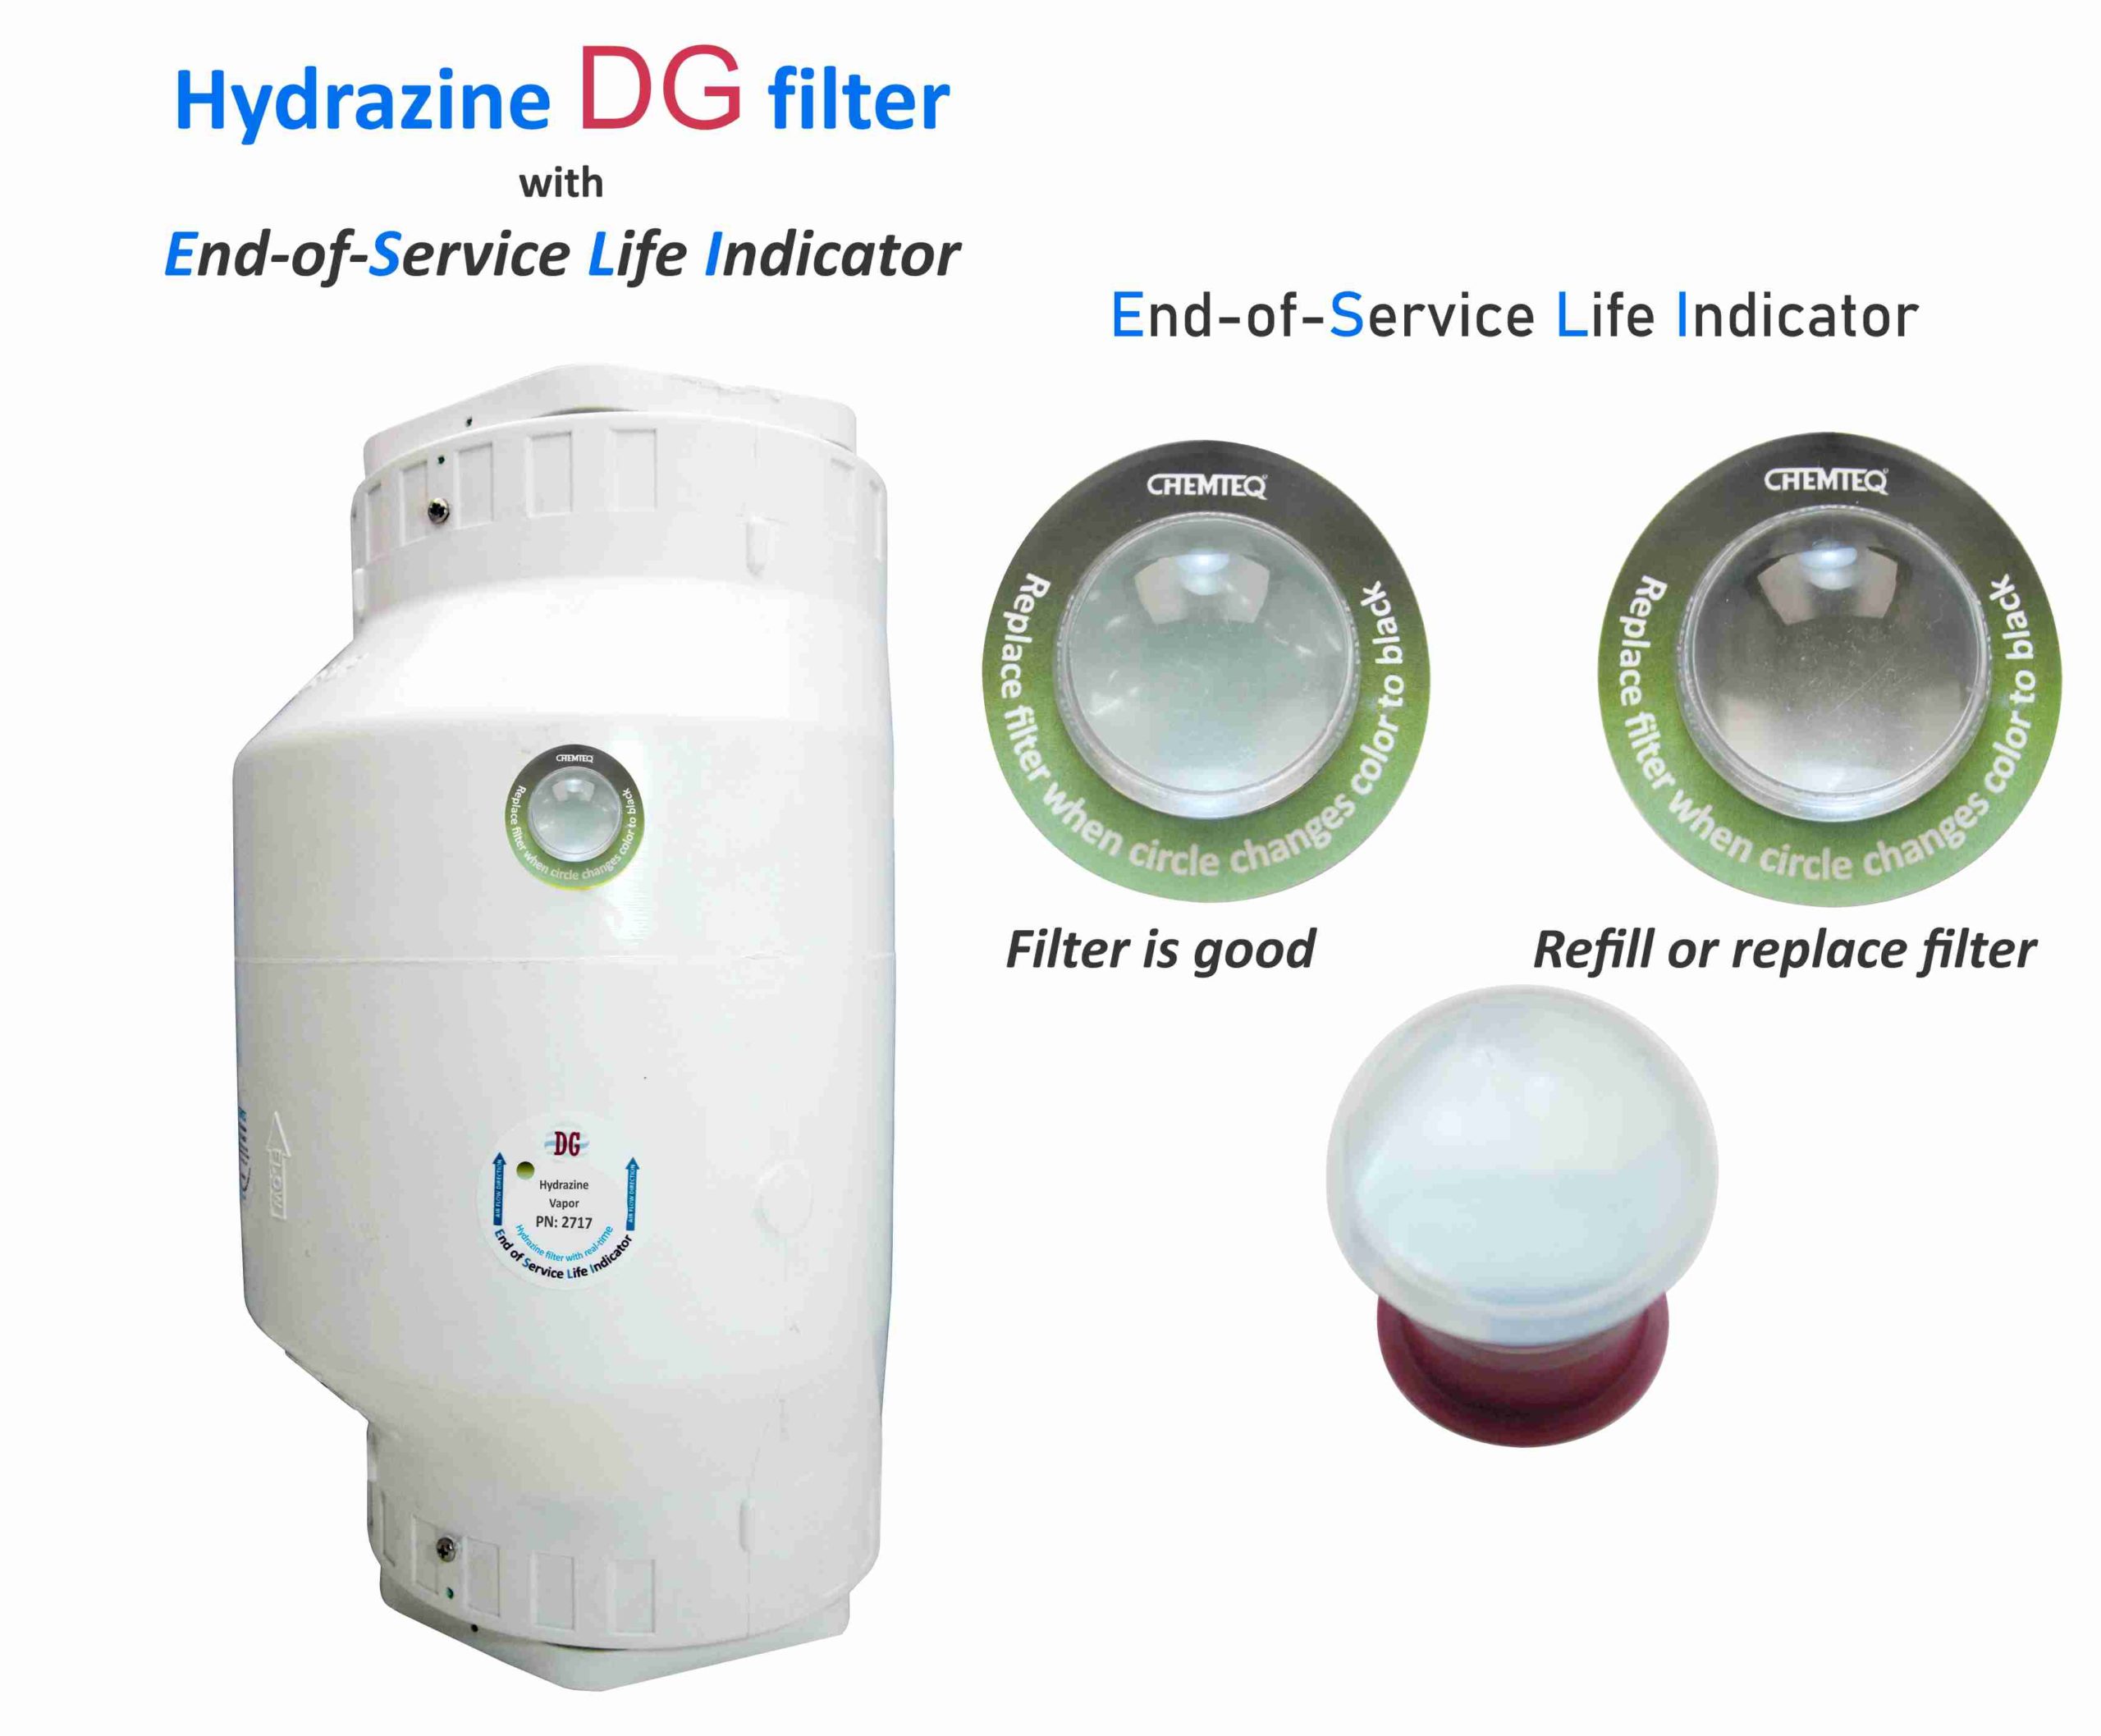 Hydrazine DG FILTER-ESLI 2717 including MIL-87930, H-70 and dimethyl hydrazine. Suitable for chemical processes and reactor vents.